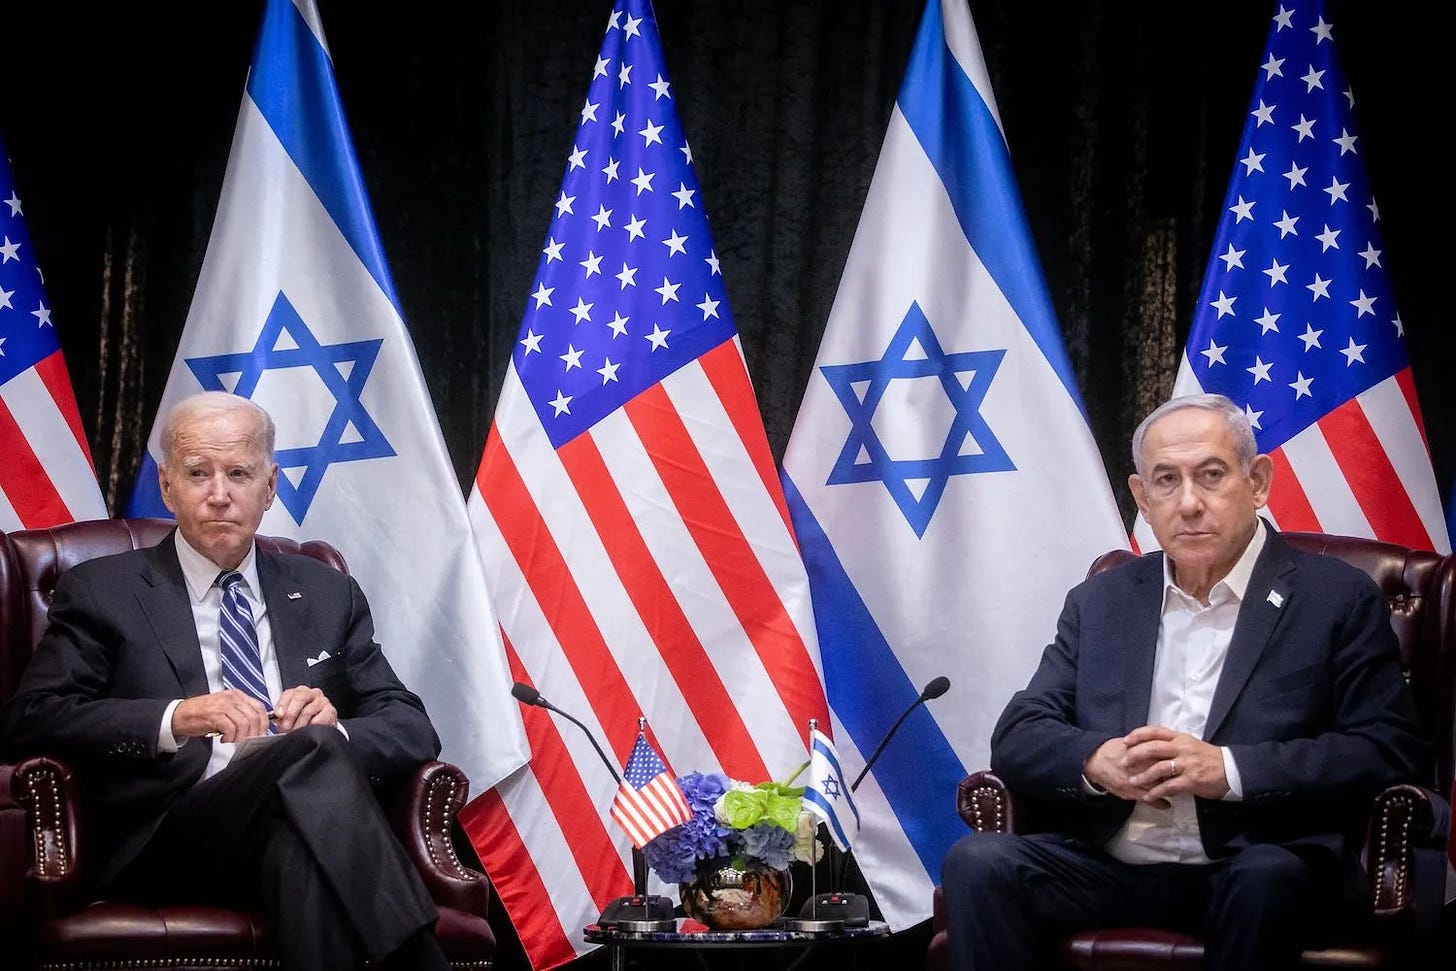 U.S. President Joe Biden (left) and Israeli Prime Minister Benjamin Netanyahu sit beside each other in a identical leather-upholstered chairs. Israeli and American flags hang from poles behind the men, and a table between them holds flowers, smaller flags, and two microphones pointed at either leader.